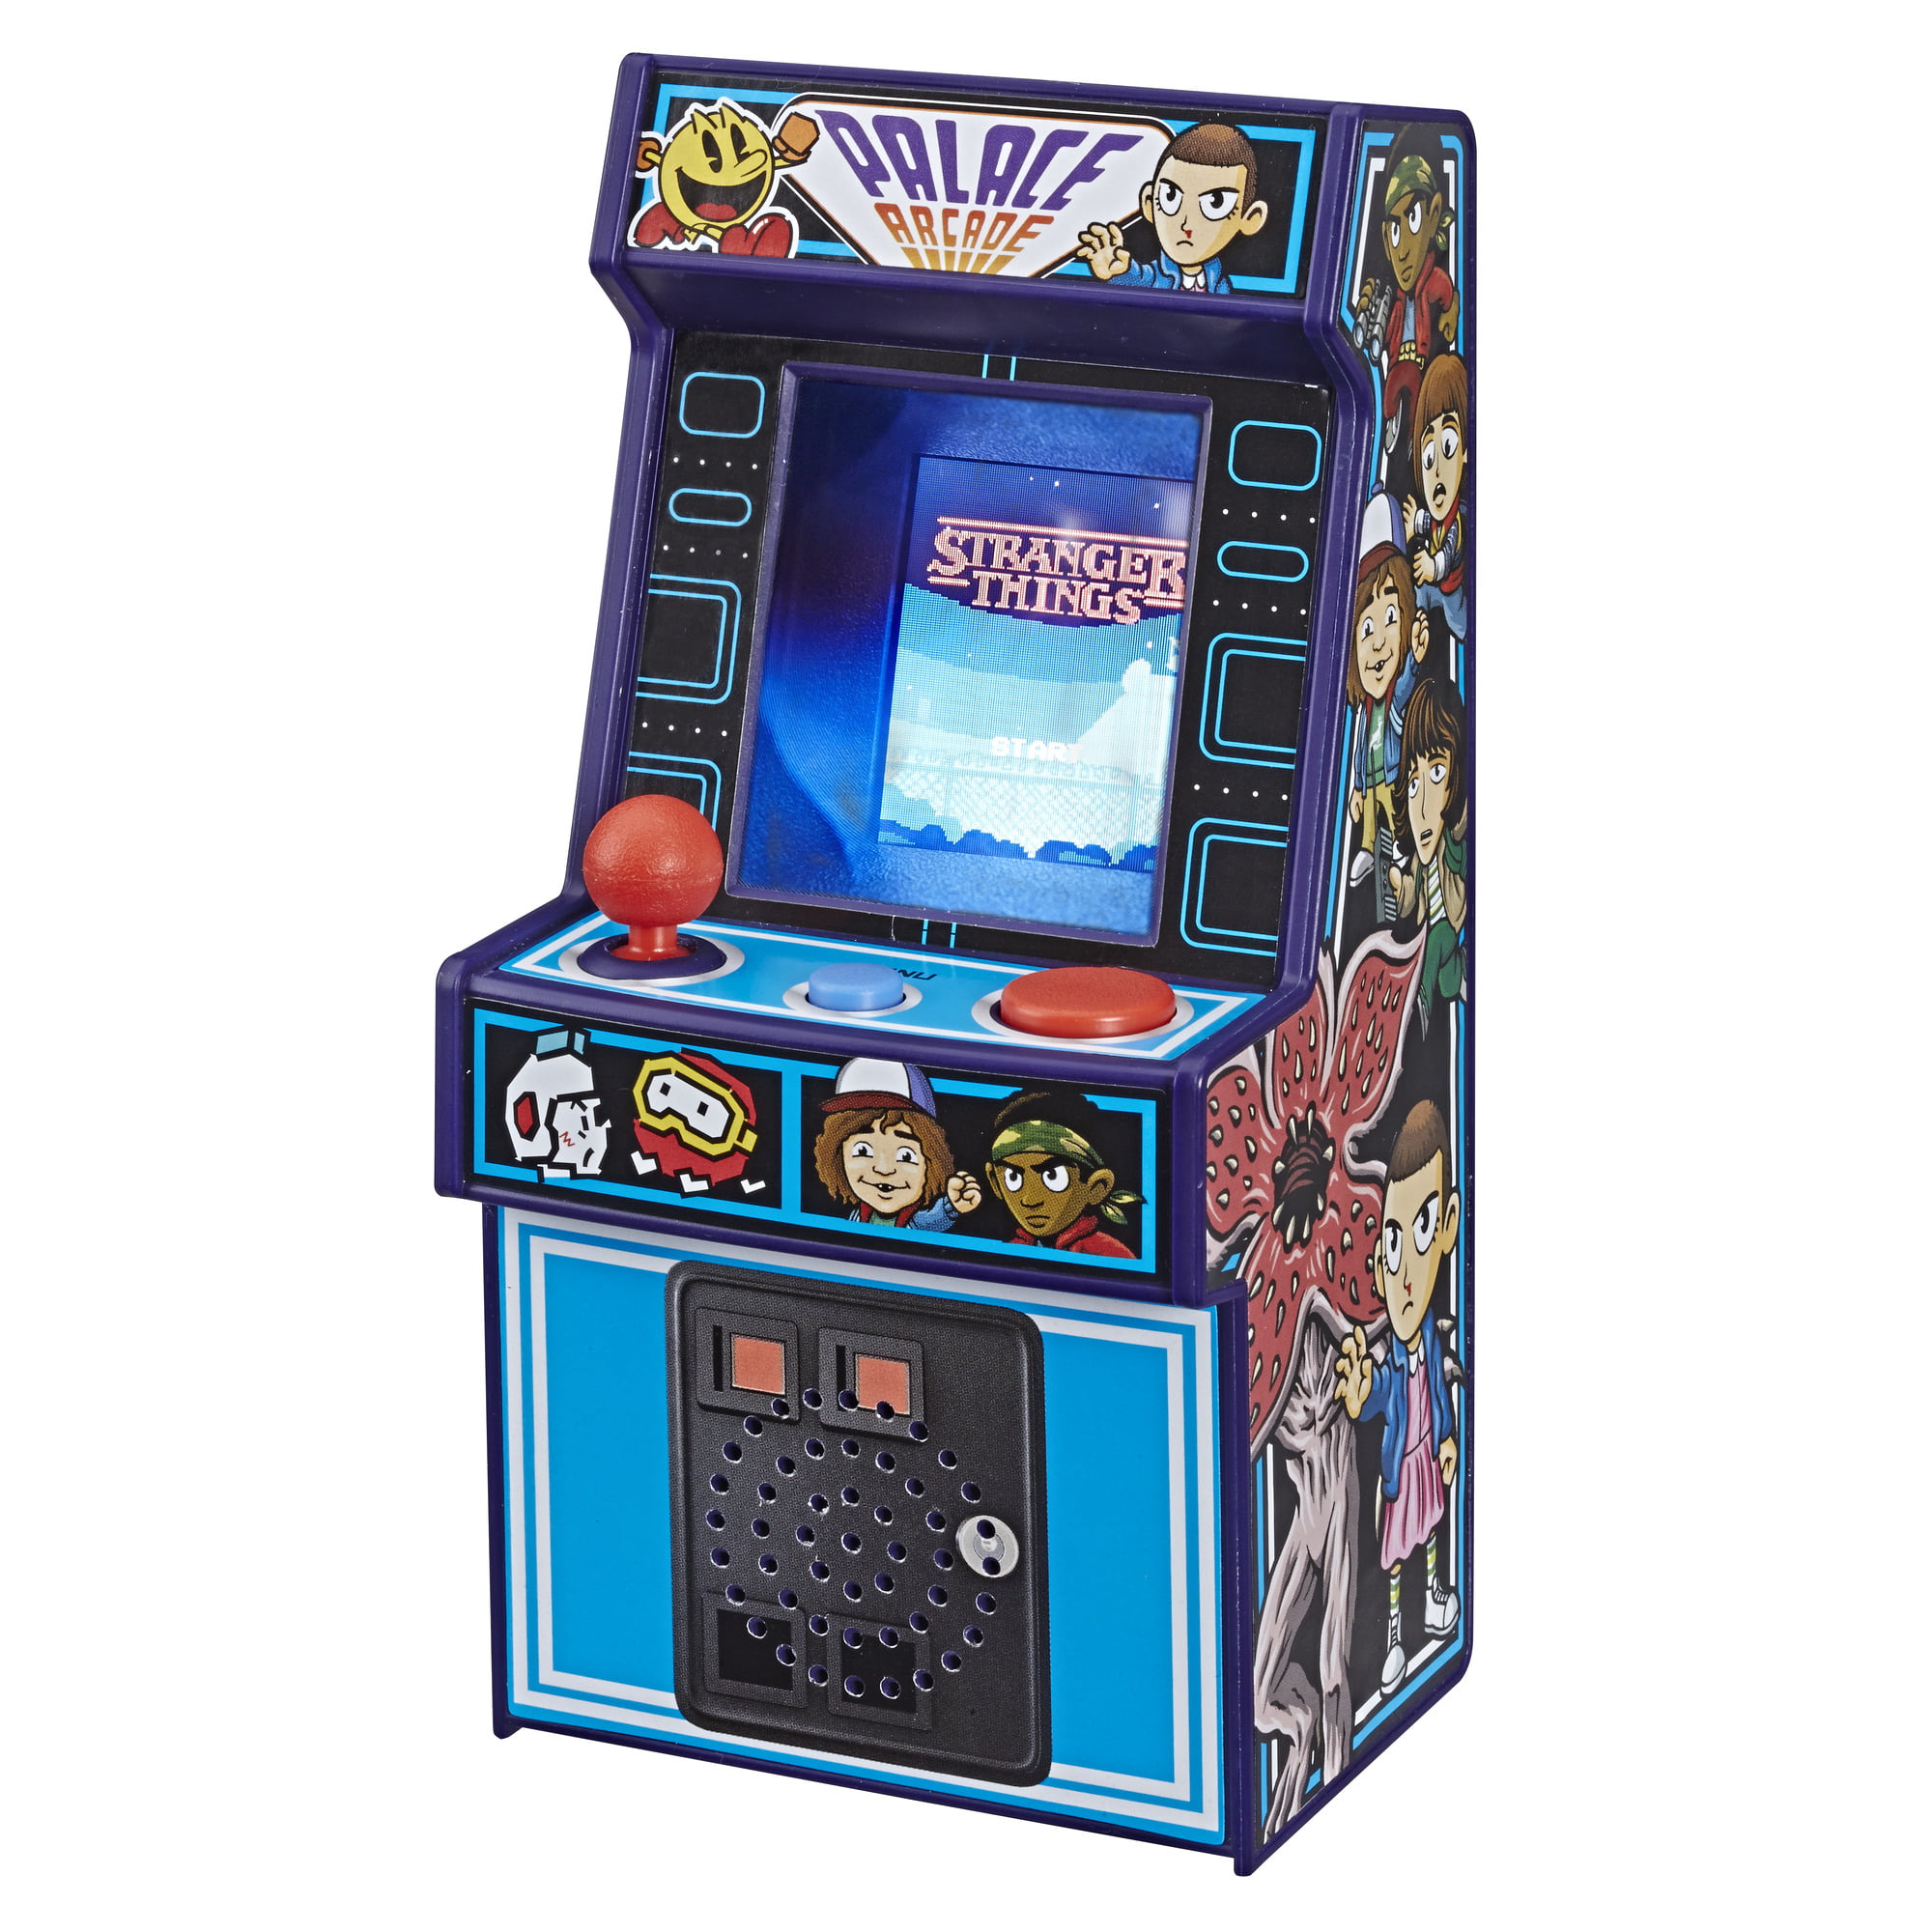 Hasbro Stranger Things Palace Arcade Handheld Electronic Game Multicoloured for sale online E5640 